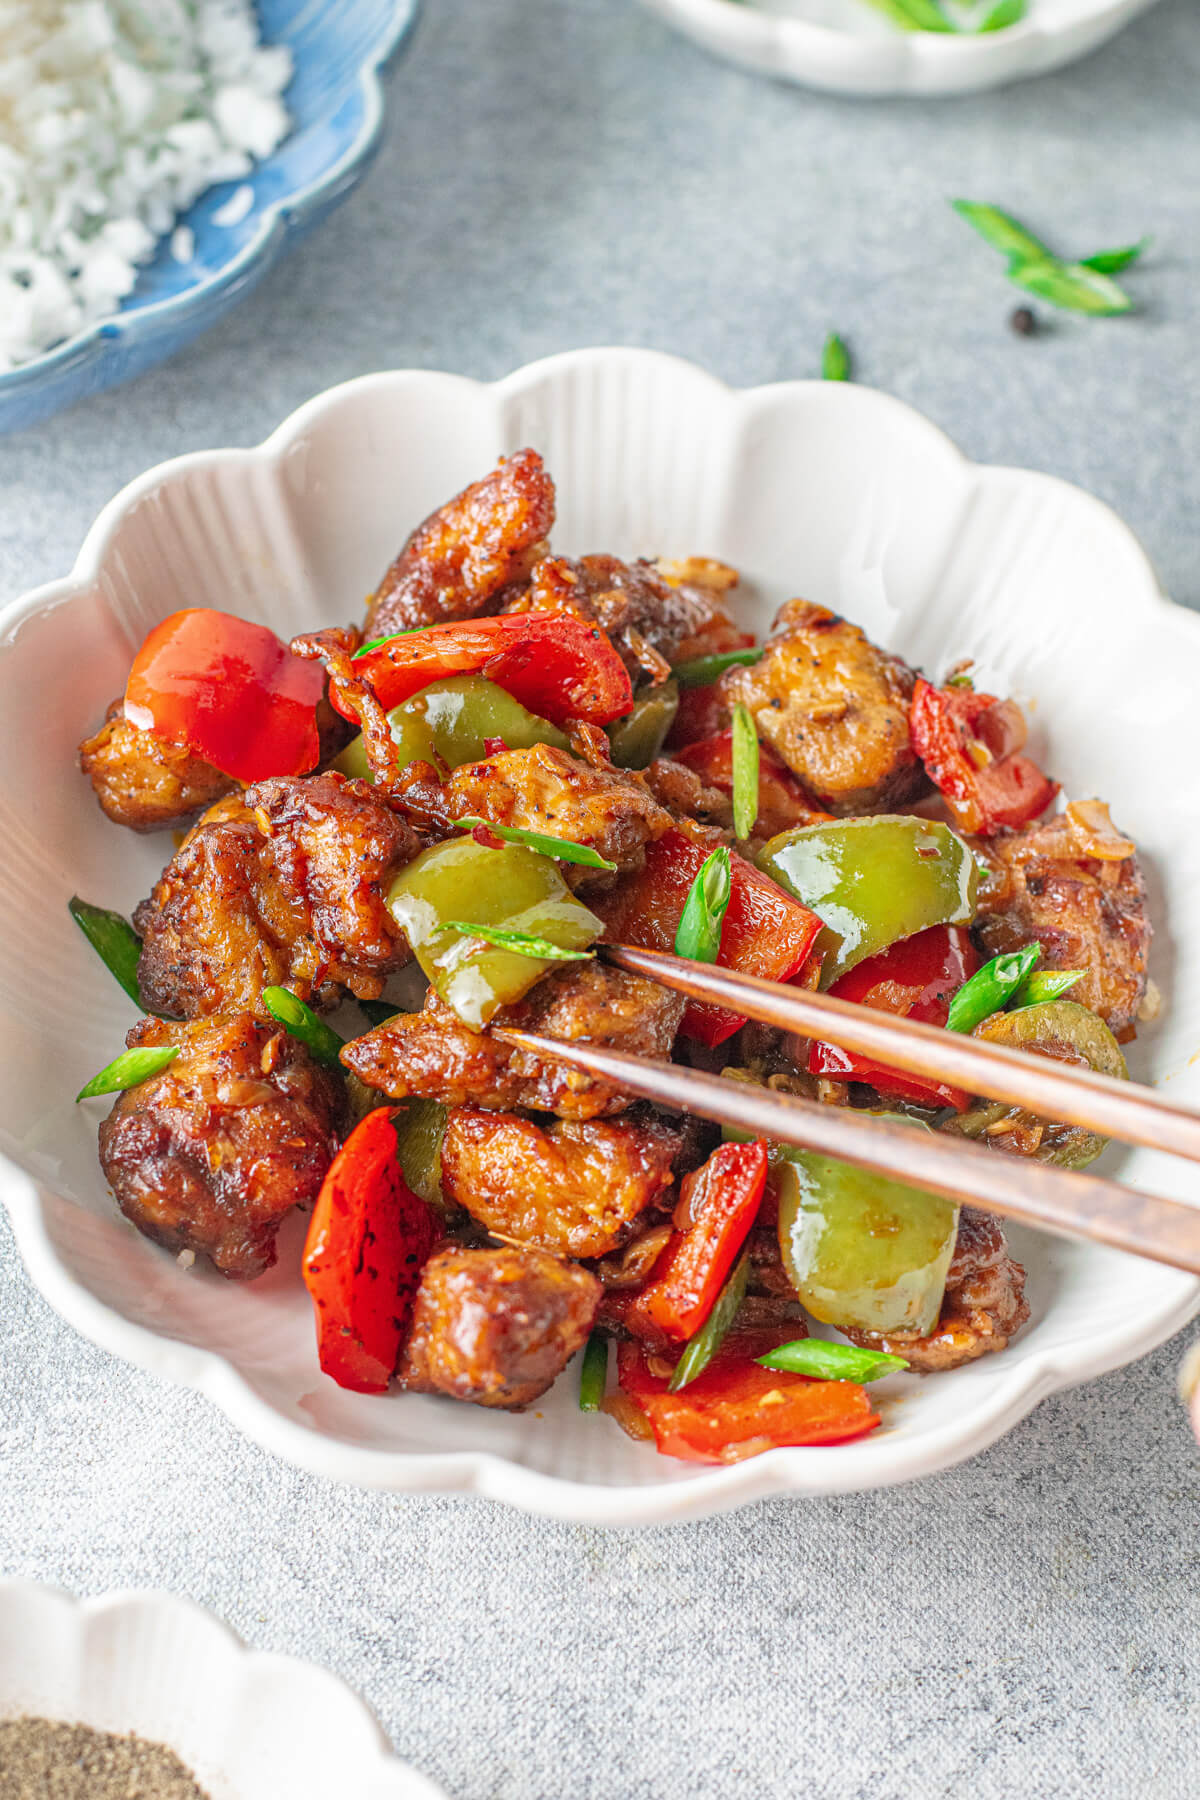 A white bowl with chopsticks containing colourful Black Pepper Chicken and vegetable stir fry.